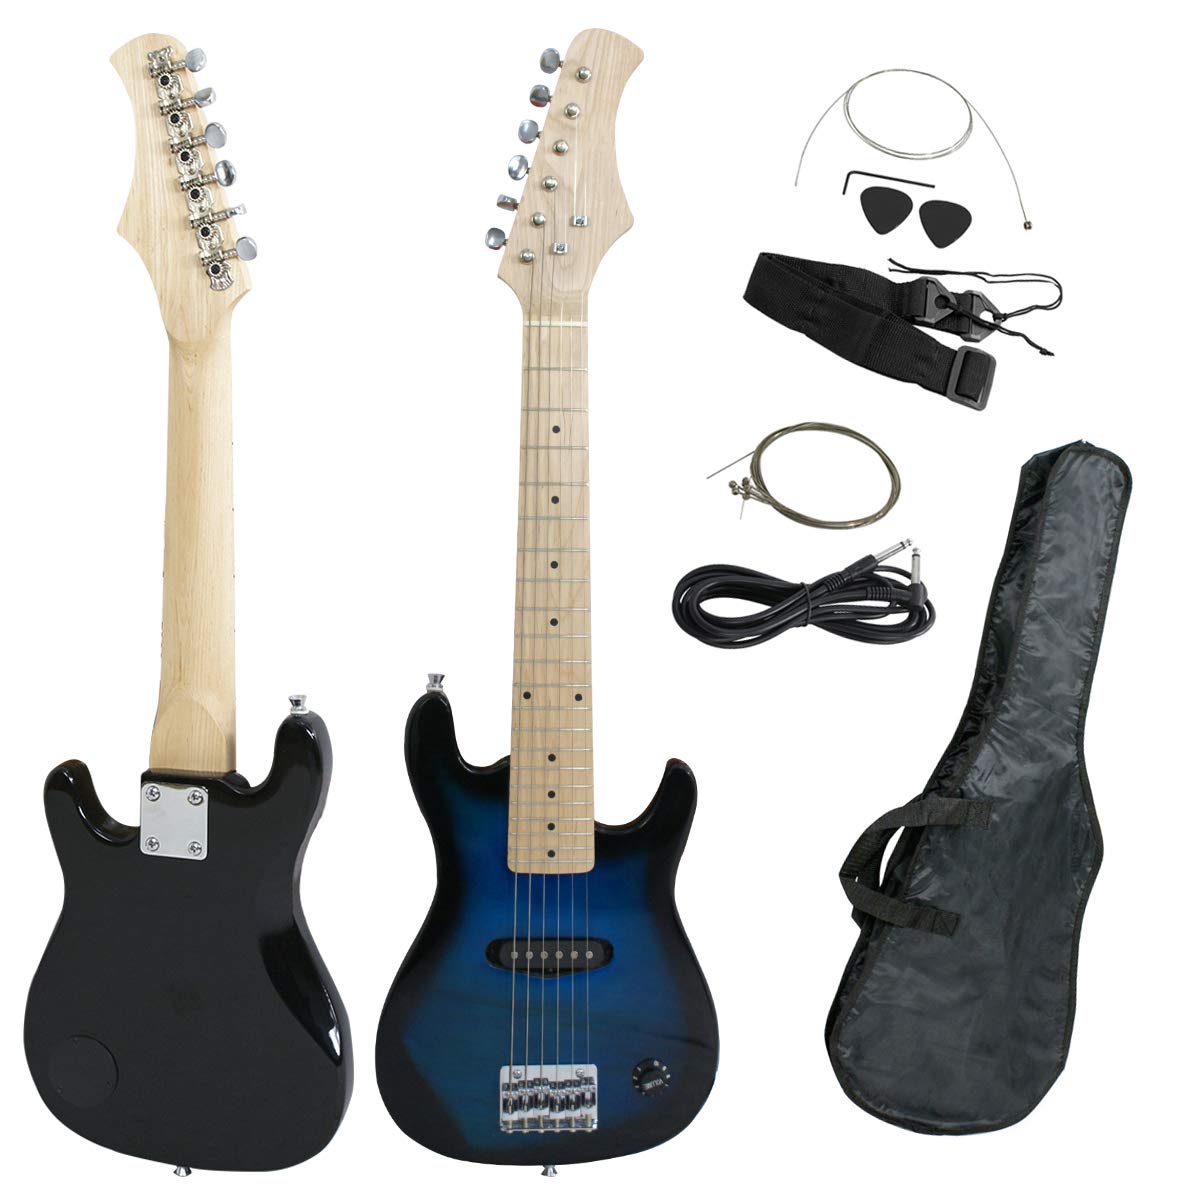 Smartxchoices 30" Mini Kids Blue Electric Guitar Bundle Kit Bass Guitar for Beginners with Gig Bag,Cable,Strap,Picks Combo Package Accessories Children Holiday Gifts (Blue, No Amp)